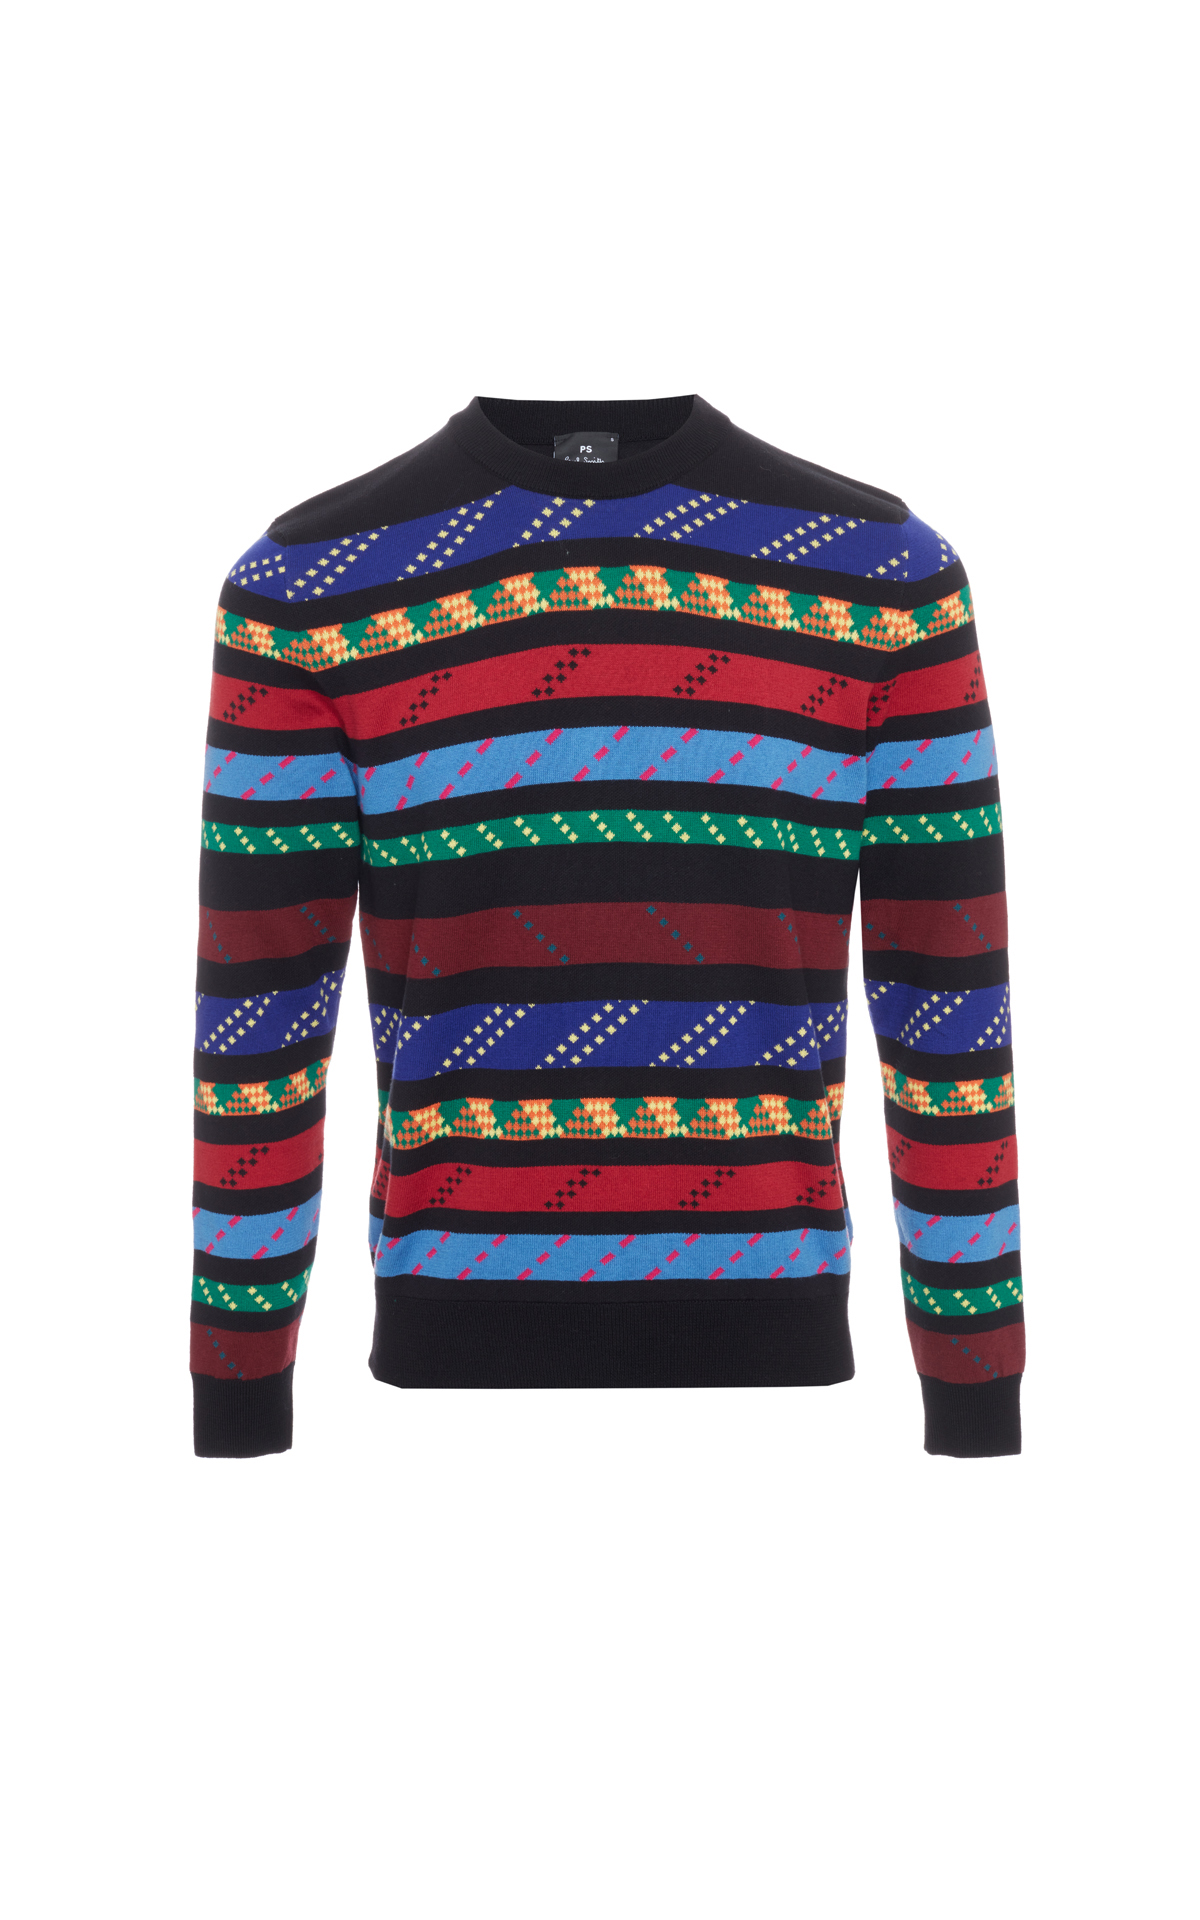 Paul Smith Crew neck from Bicester Village